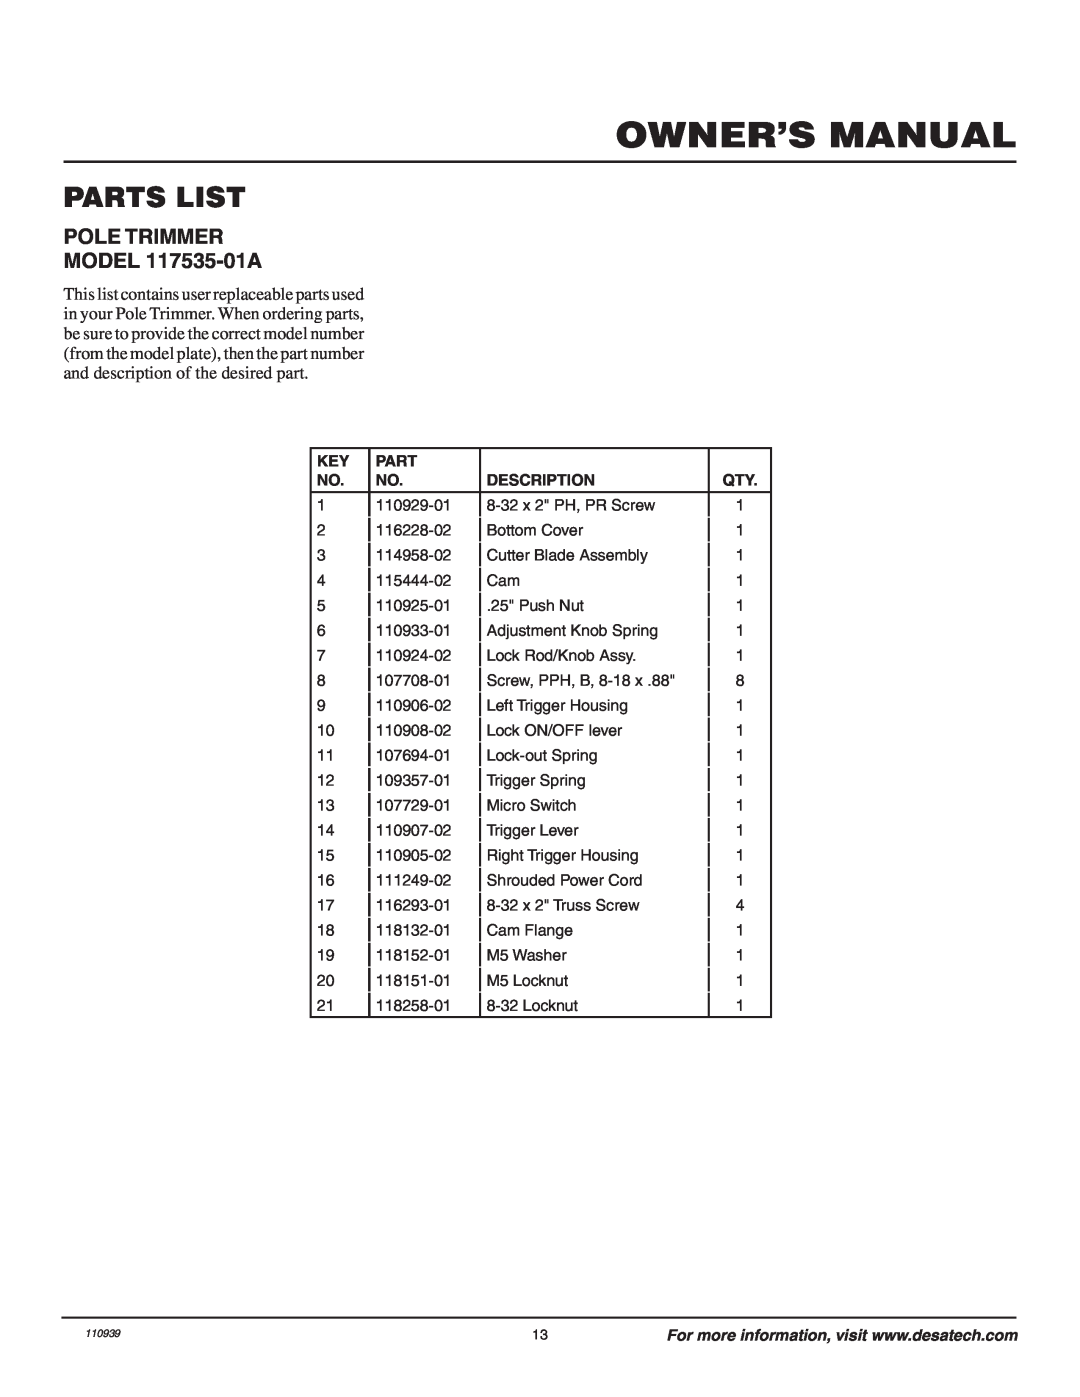 Remington Power Tools owner manual Parts List, Owner’S Manual, POLE TRIMMER MODEL 117535-01A 